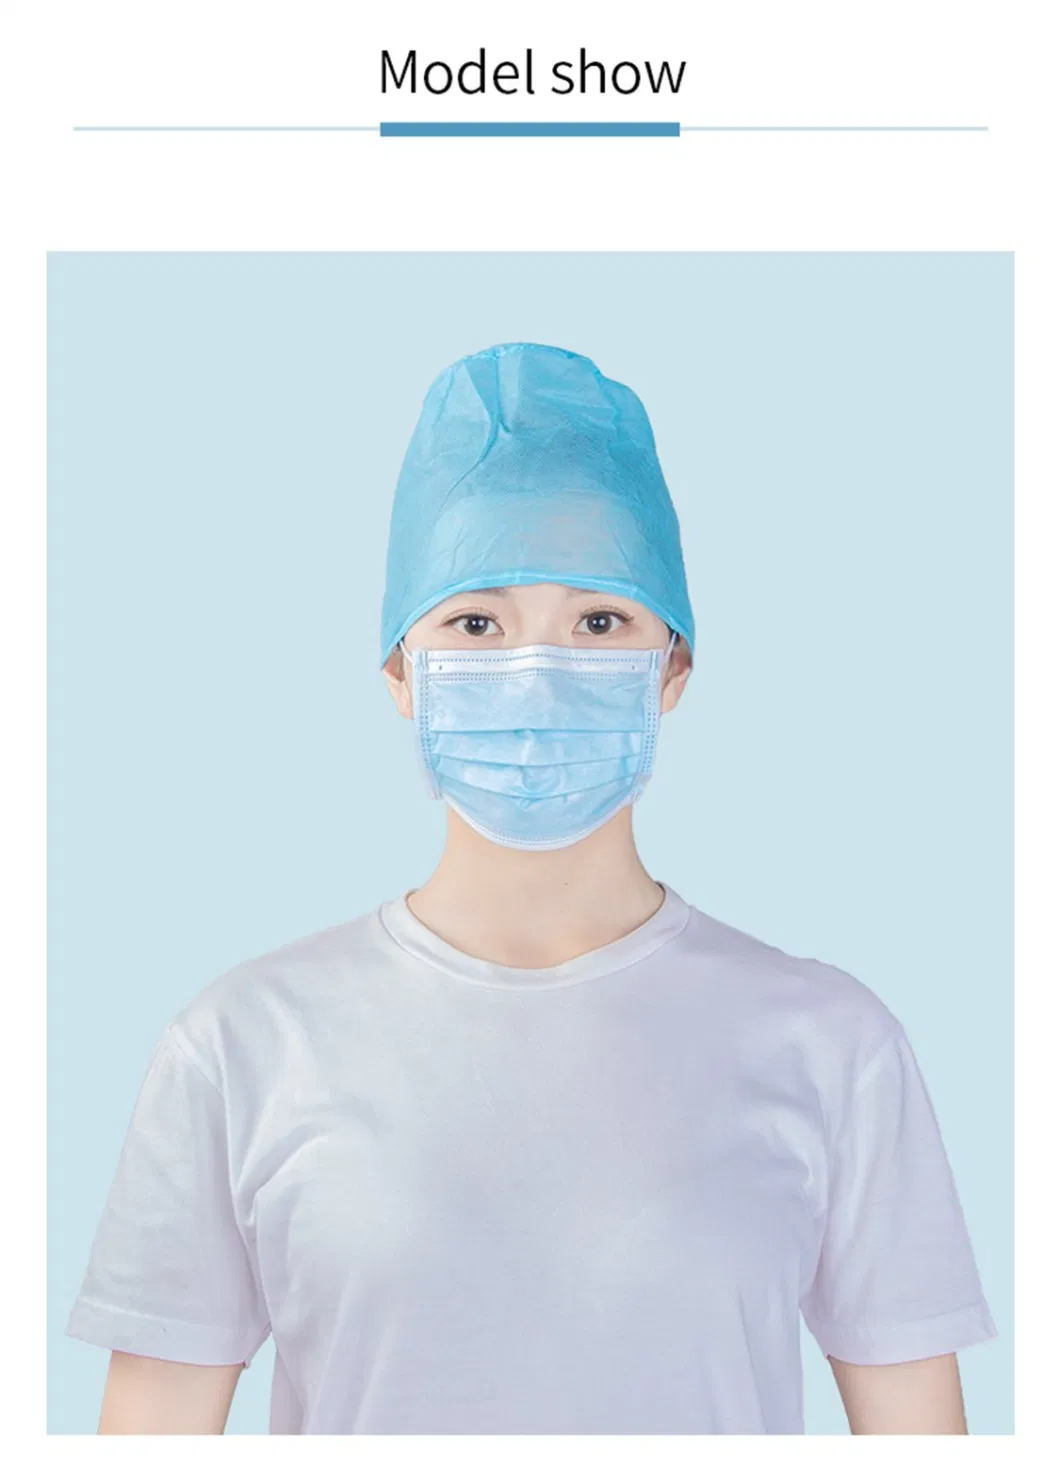 Hand made Disposable Non-Woven Surgical Cap with Ties for Doctors